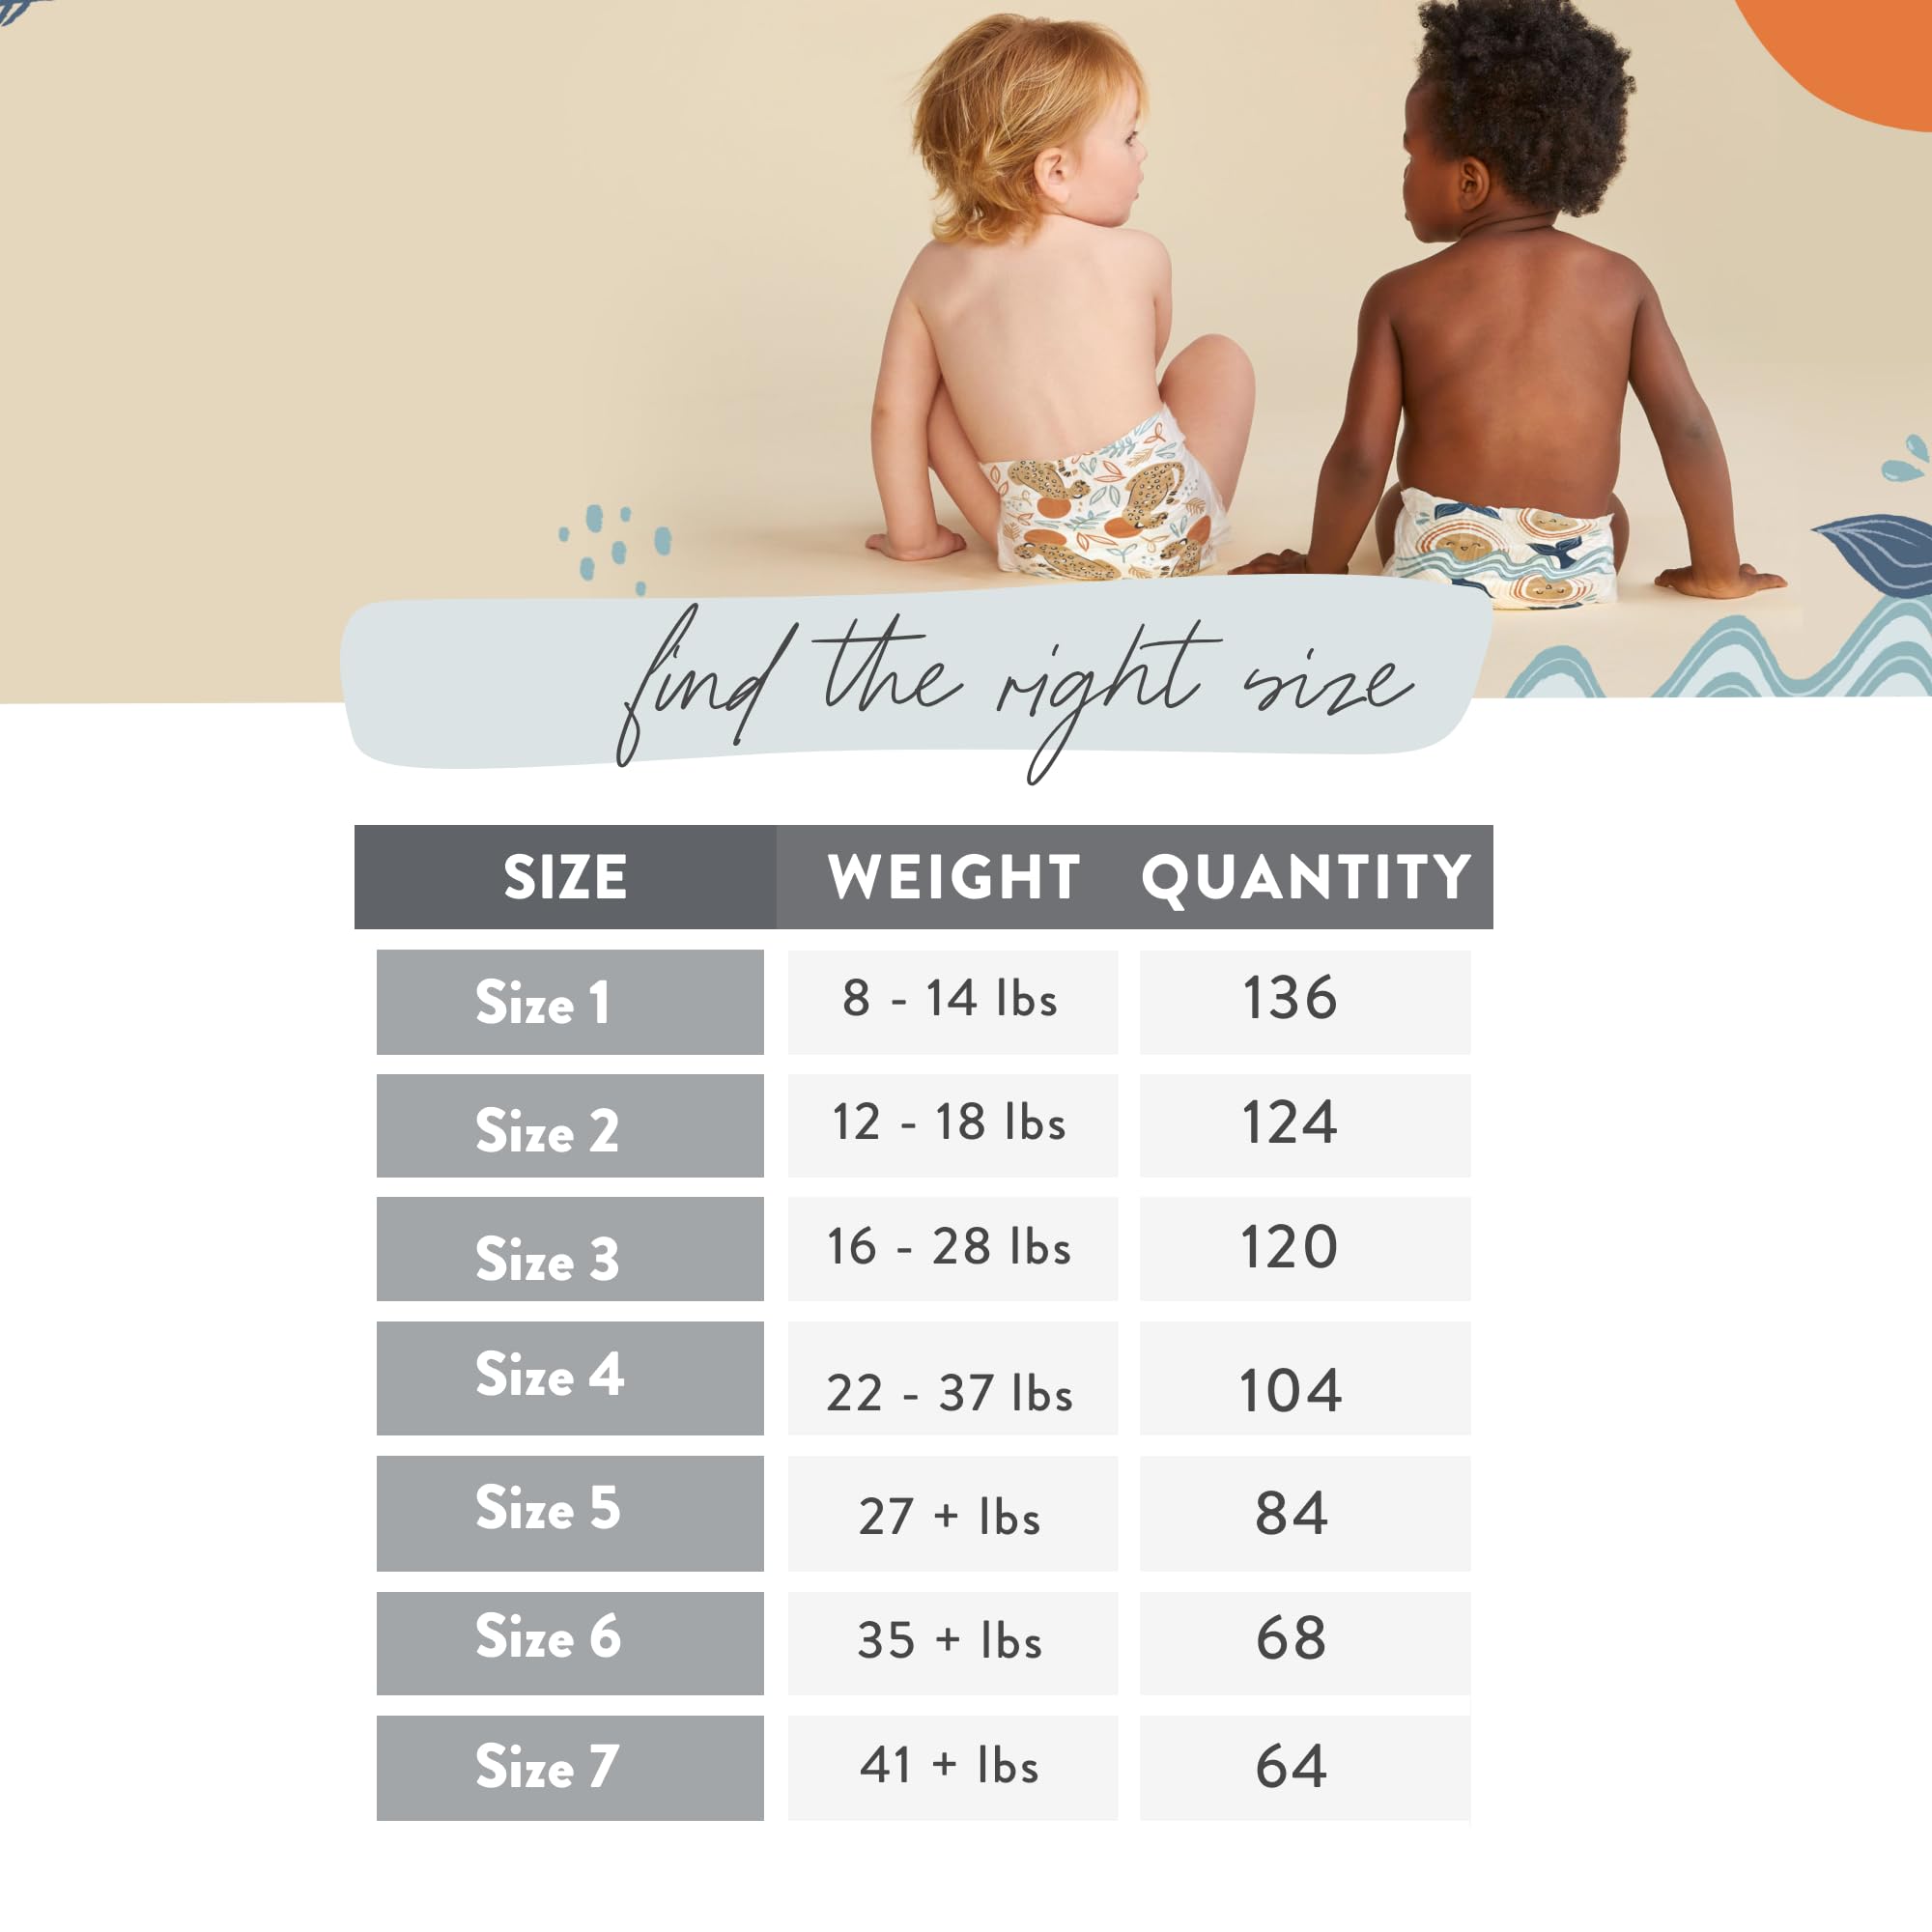 The Honest Company Clean Conscious Diapers | Plant-Based, Sustainable | Wild Thang + Flower Power | Super Club Box, Size 3 (16-28 lbs), 120 Count